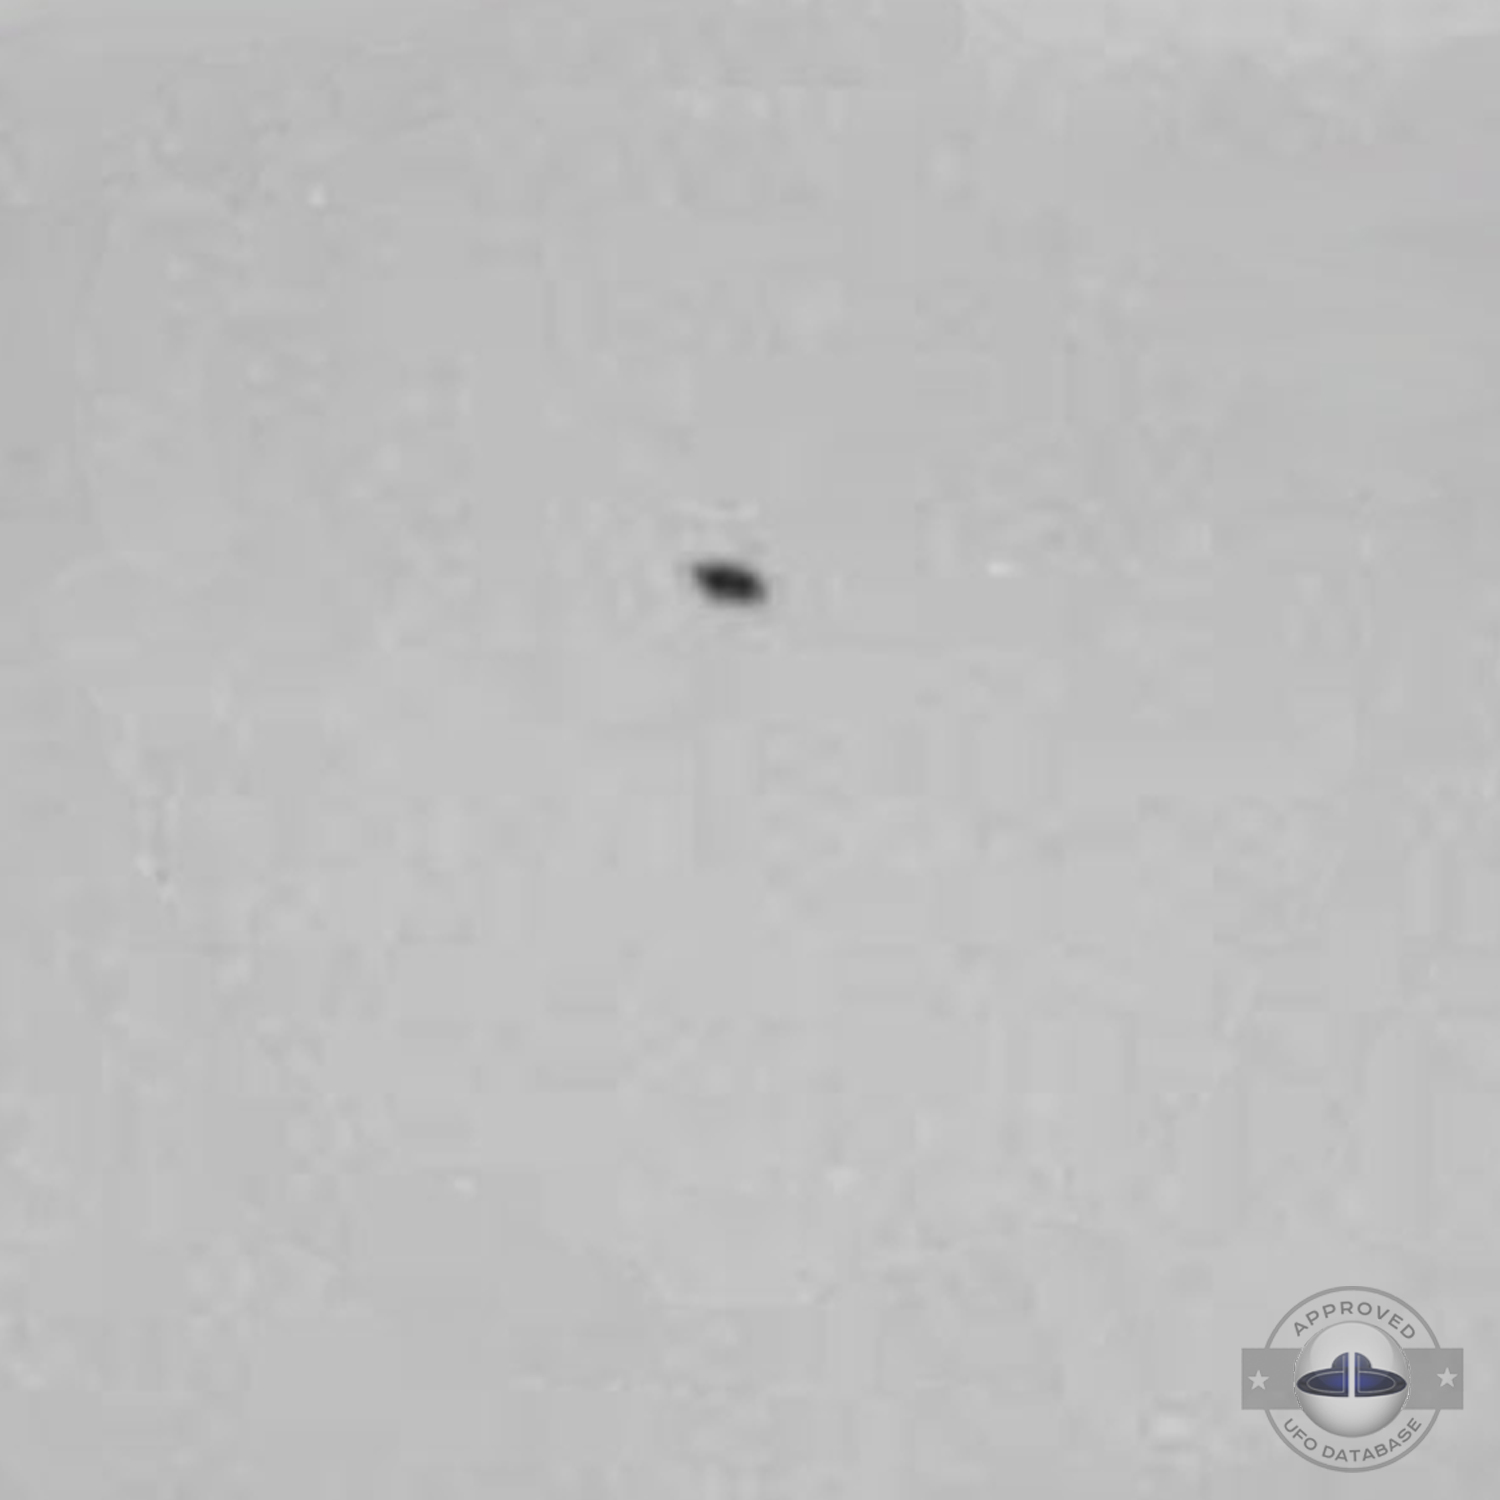 UFO picture taken over an airport somewhere in Argentina in 1967 UFO Picture #23-3